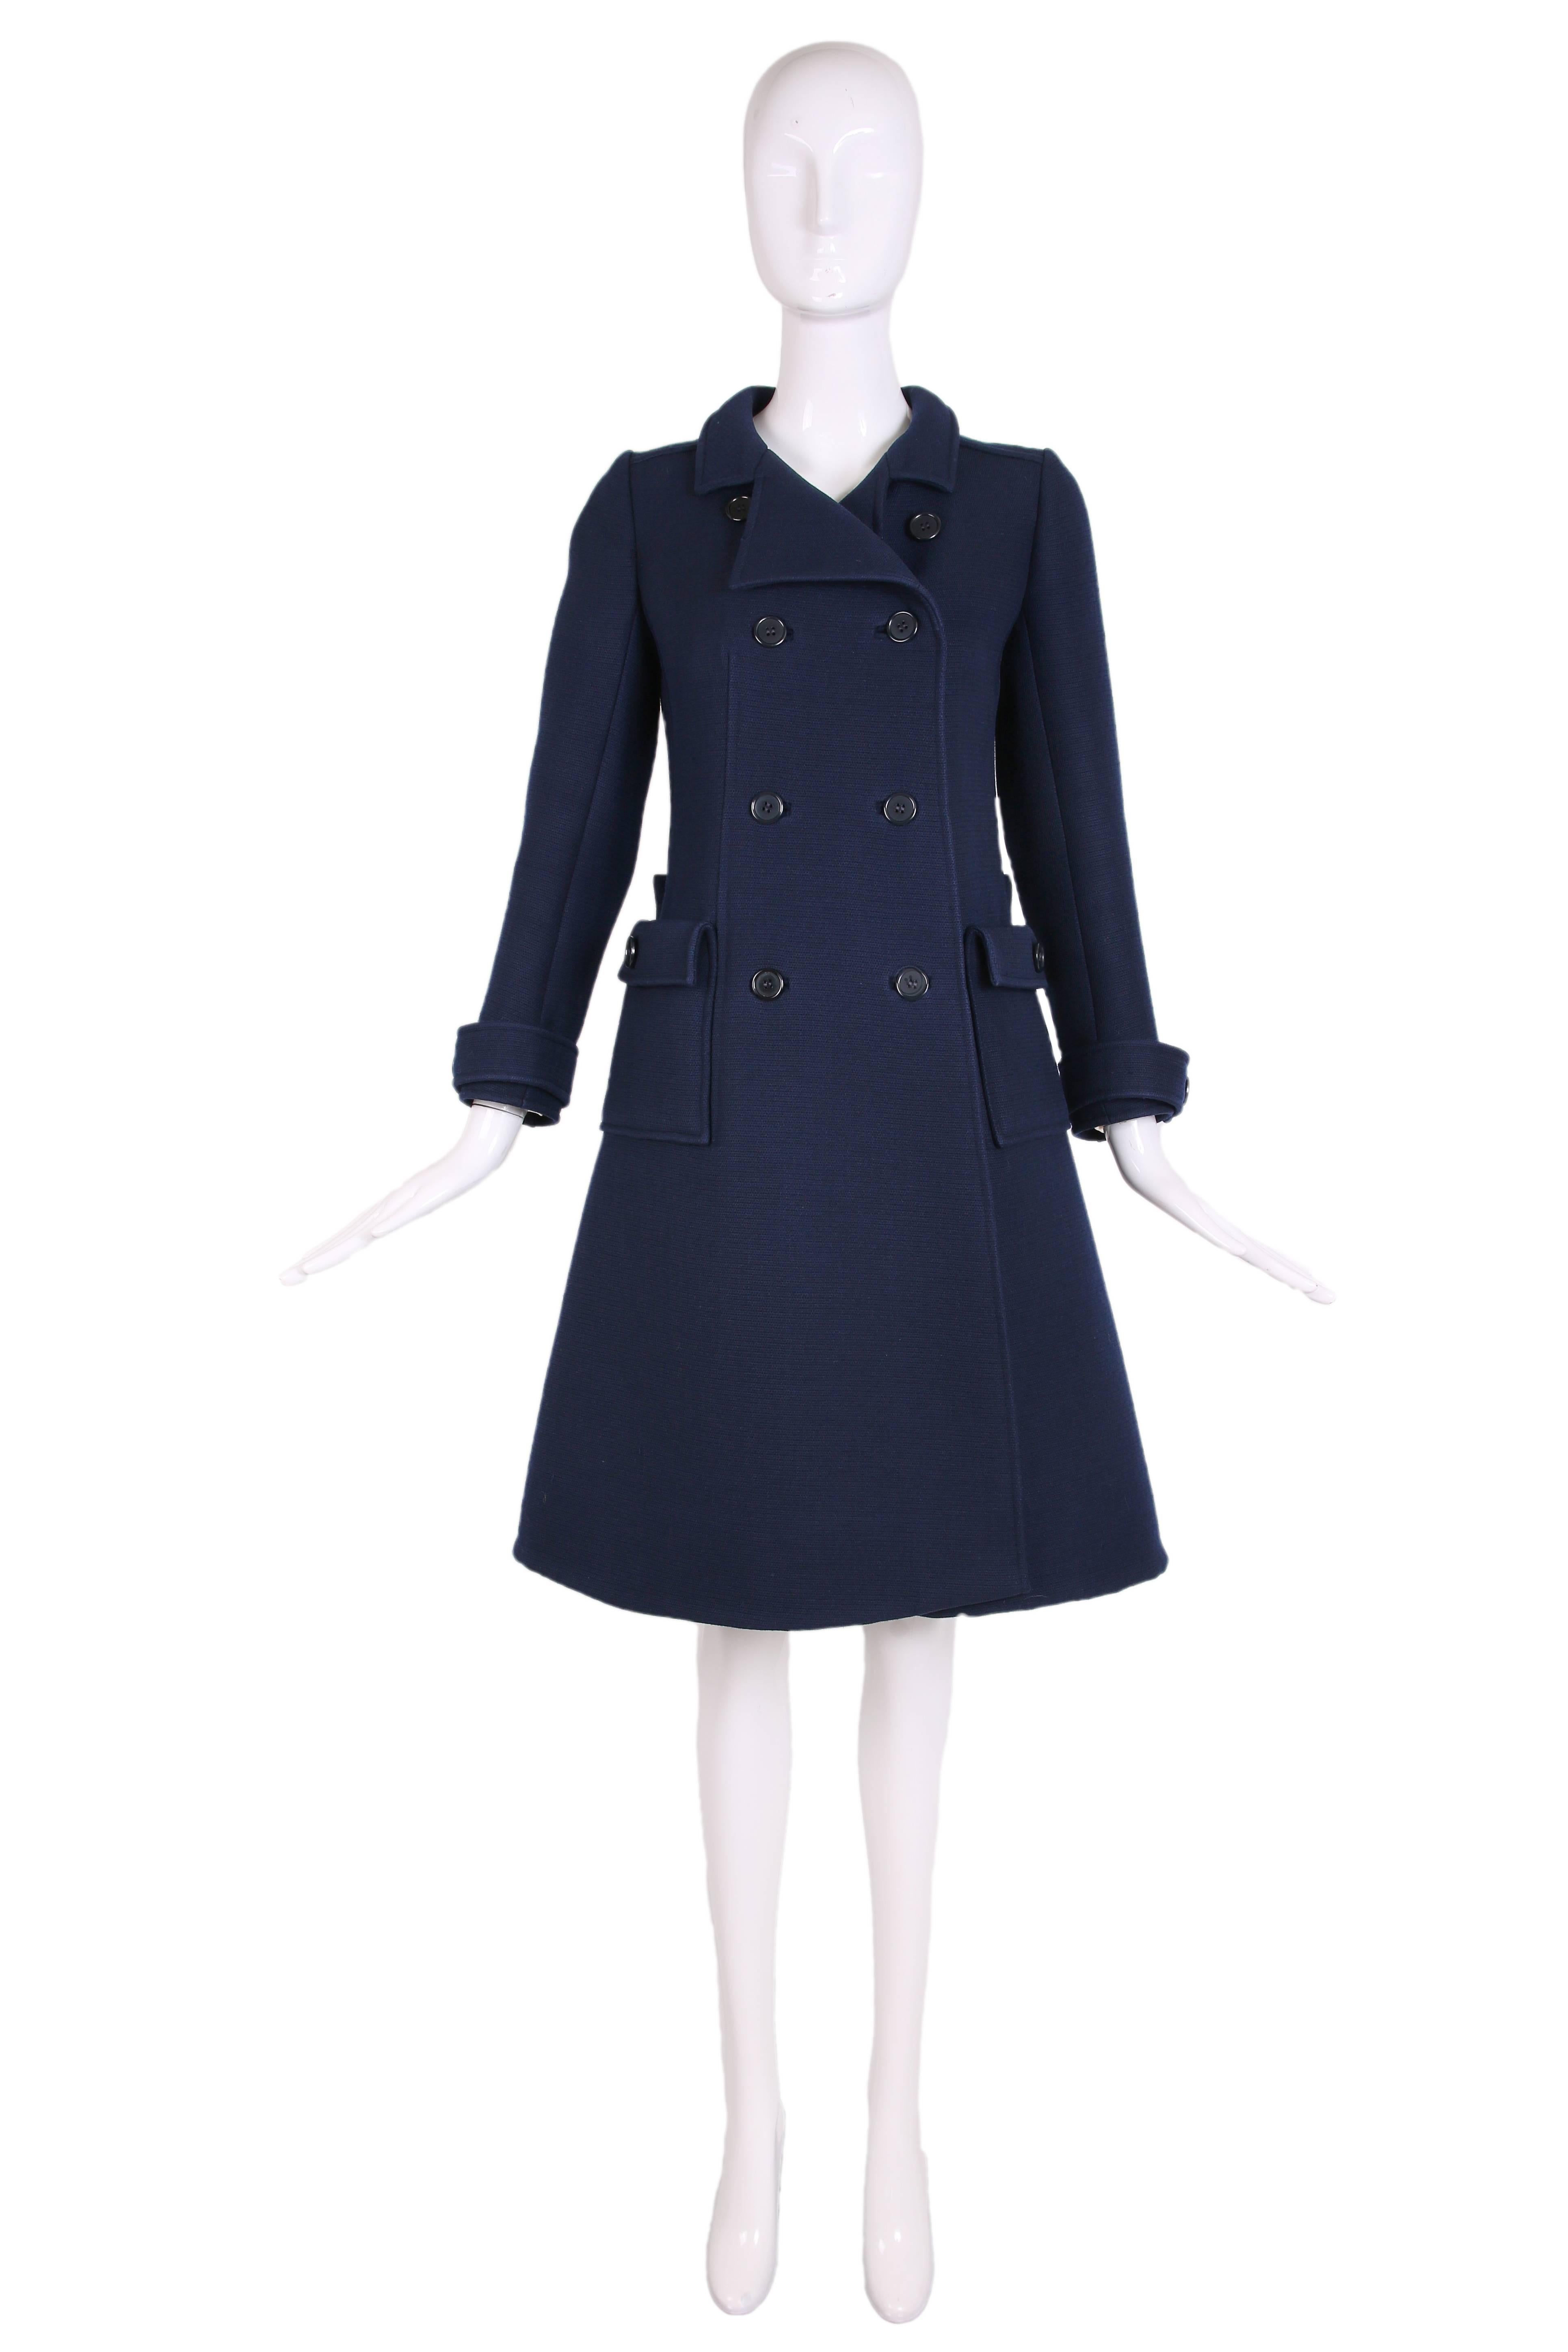 1960's Courreges for Bonwit Teller mod navy wool double-breasted coat. Fully lined with back bar belt and flap pockets. Courreges size 0. In very good to excellent condition with some faint yellow staining throughout the interior lining. Please